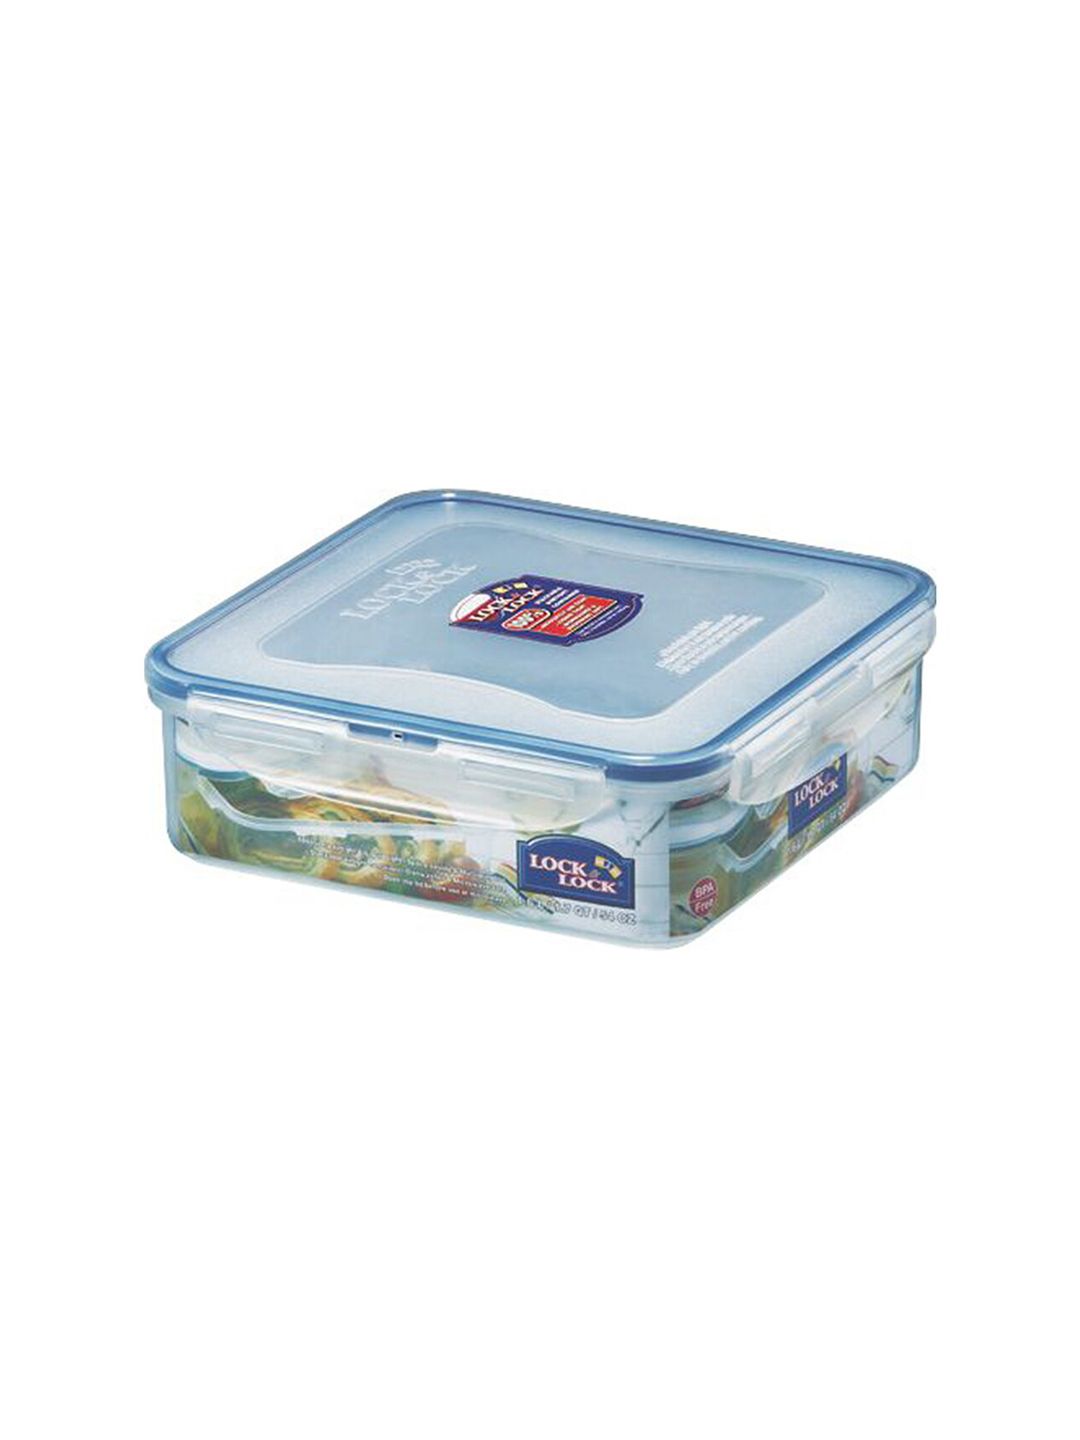 Lock & Lock Transparent Plastic Airtight Food Storage Container With Leakproof Lid 1.6 L Price in India